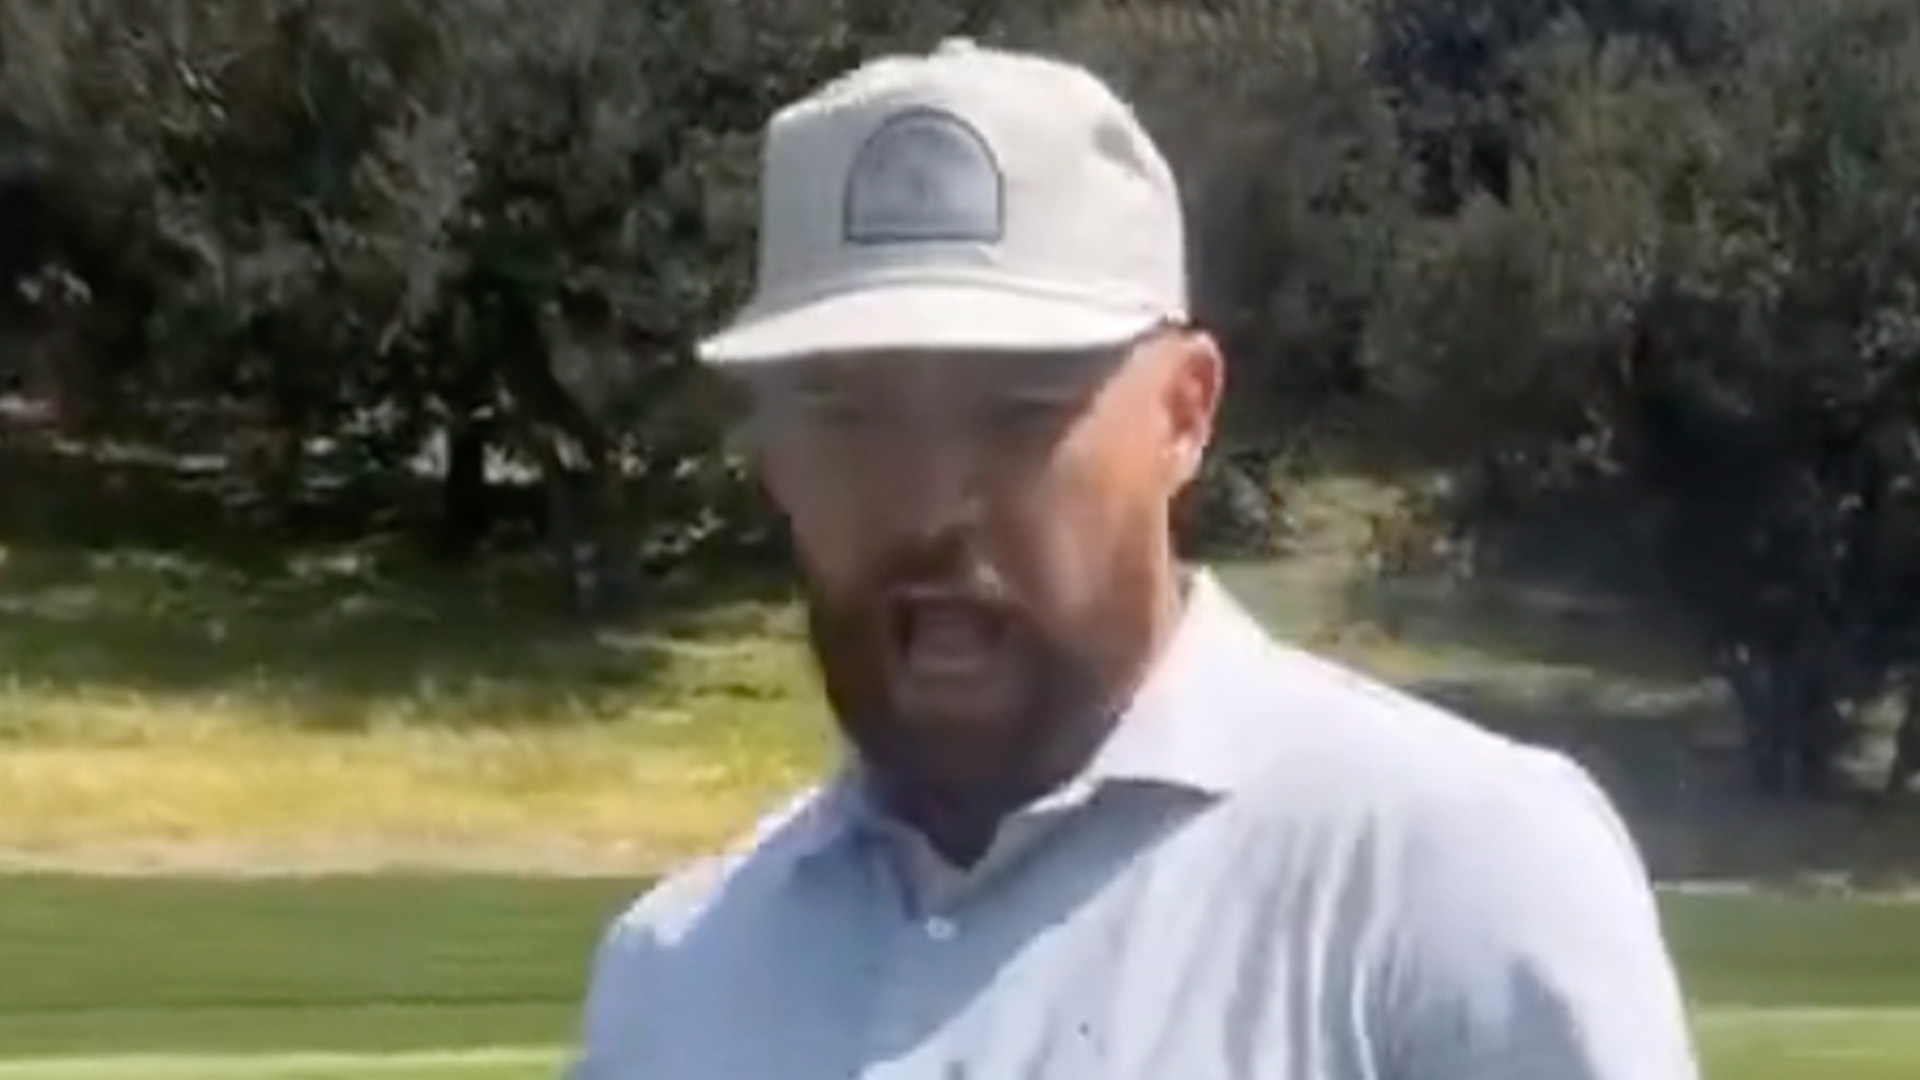 “Taylor Swift Fans Frenzy Over Travis Kelce’s Hidden Tribute in NFL Star’s Golf Outfit!” #TaylorSwift #TravisKelce #NFLStar #HiddenTribute #GolfOutfit